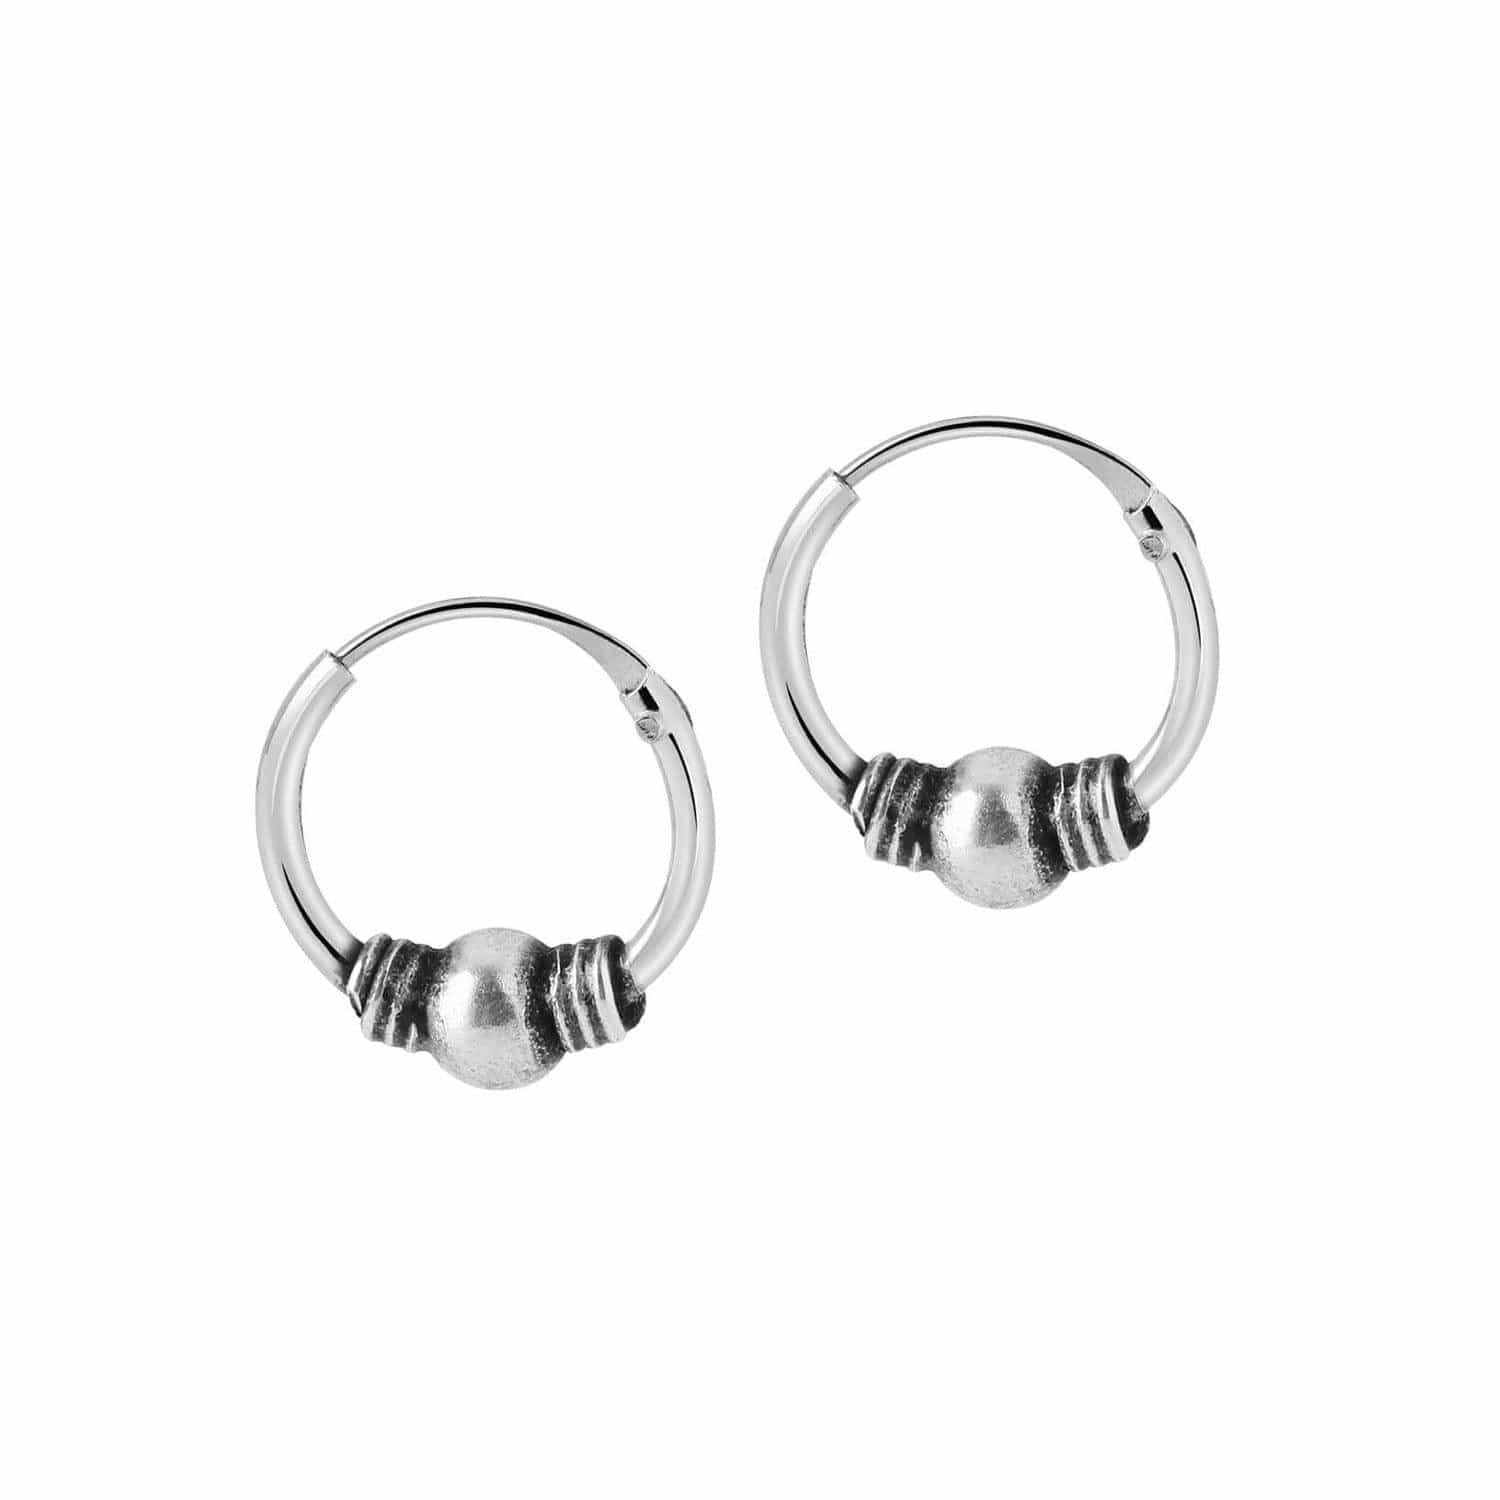 Small Silver Bali Hoop Earrings with ball